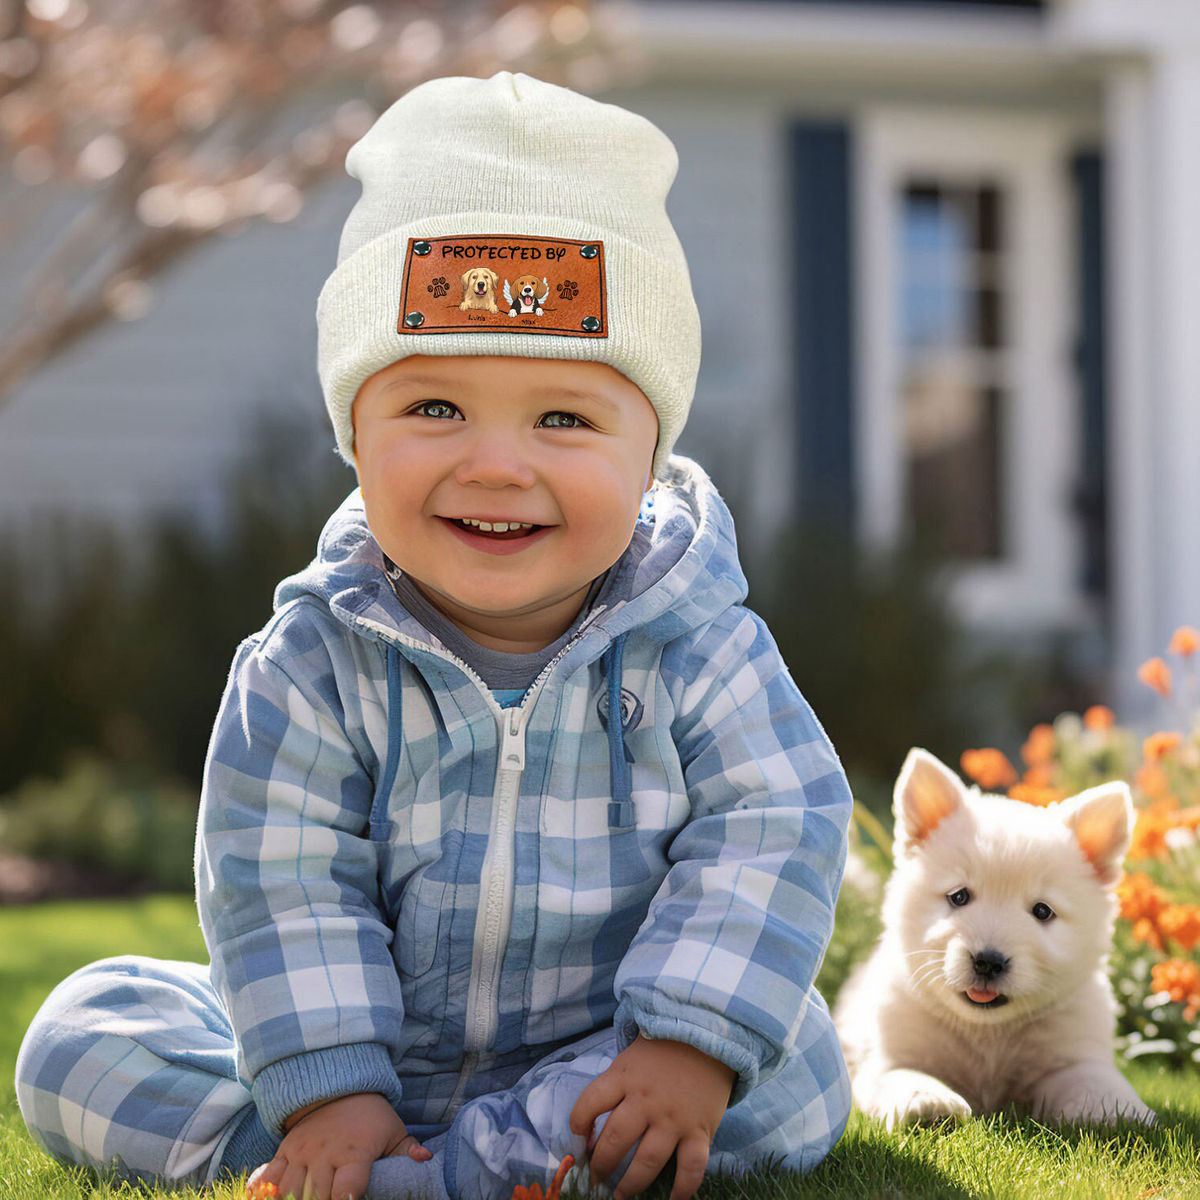 Custom Baby Beanie - Protected By Dog - Christmas Gift Baby (56566)_5